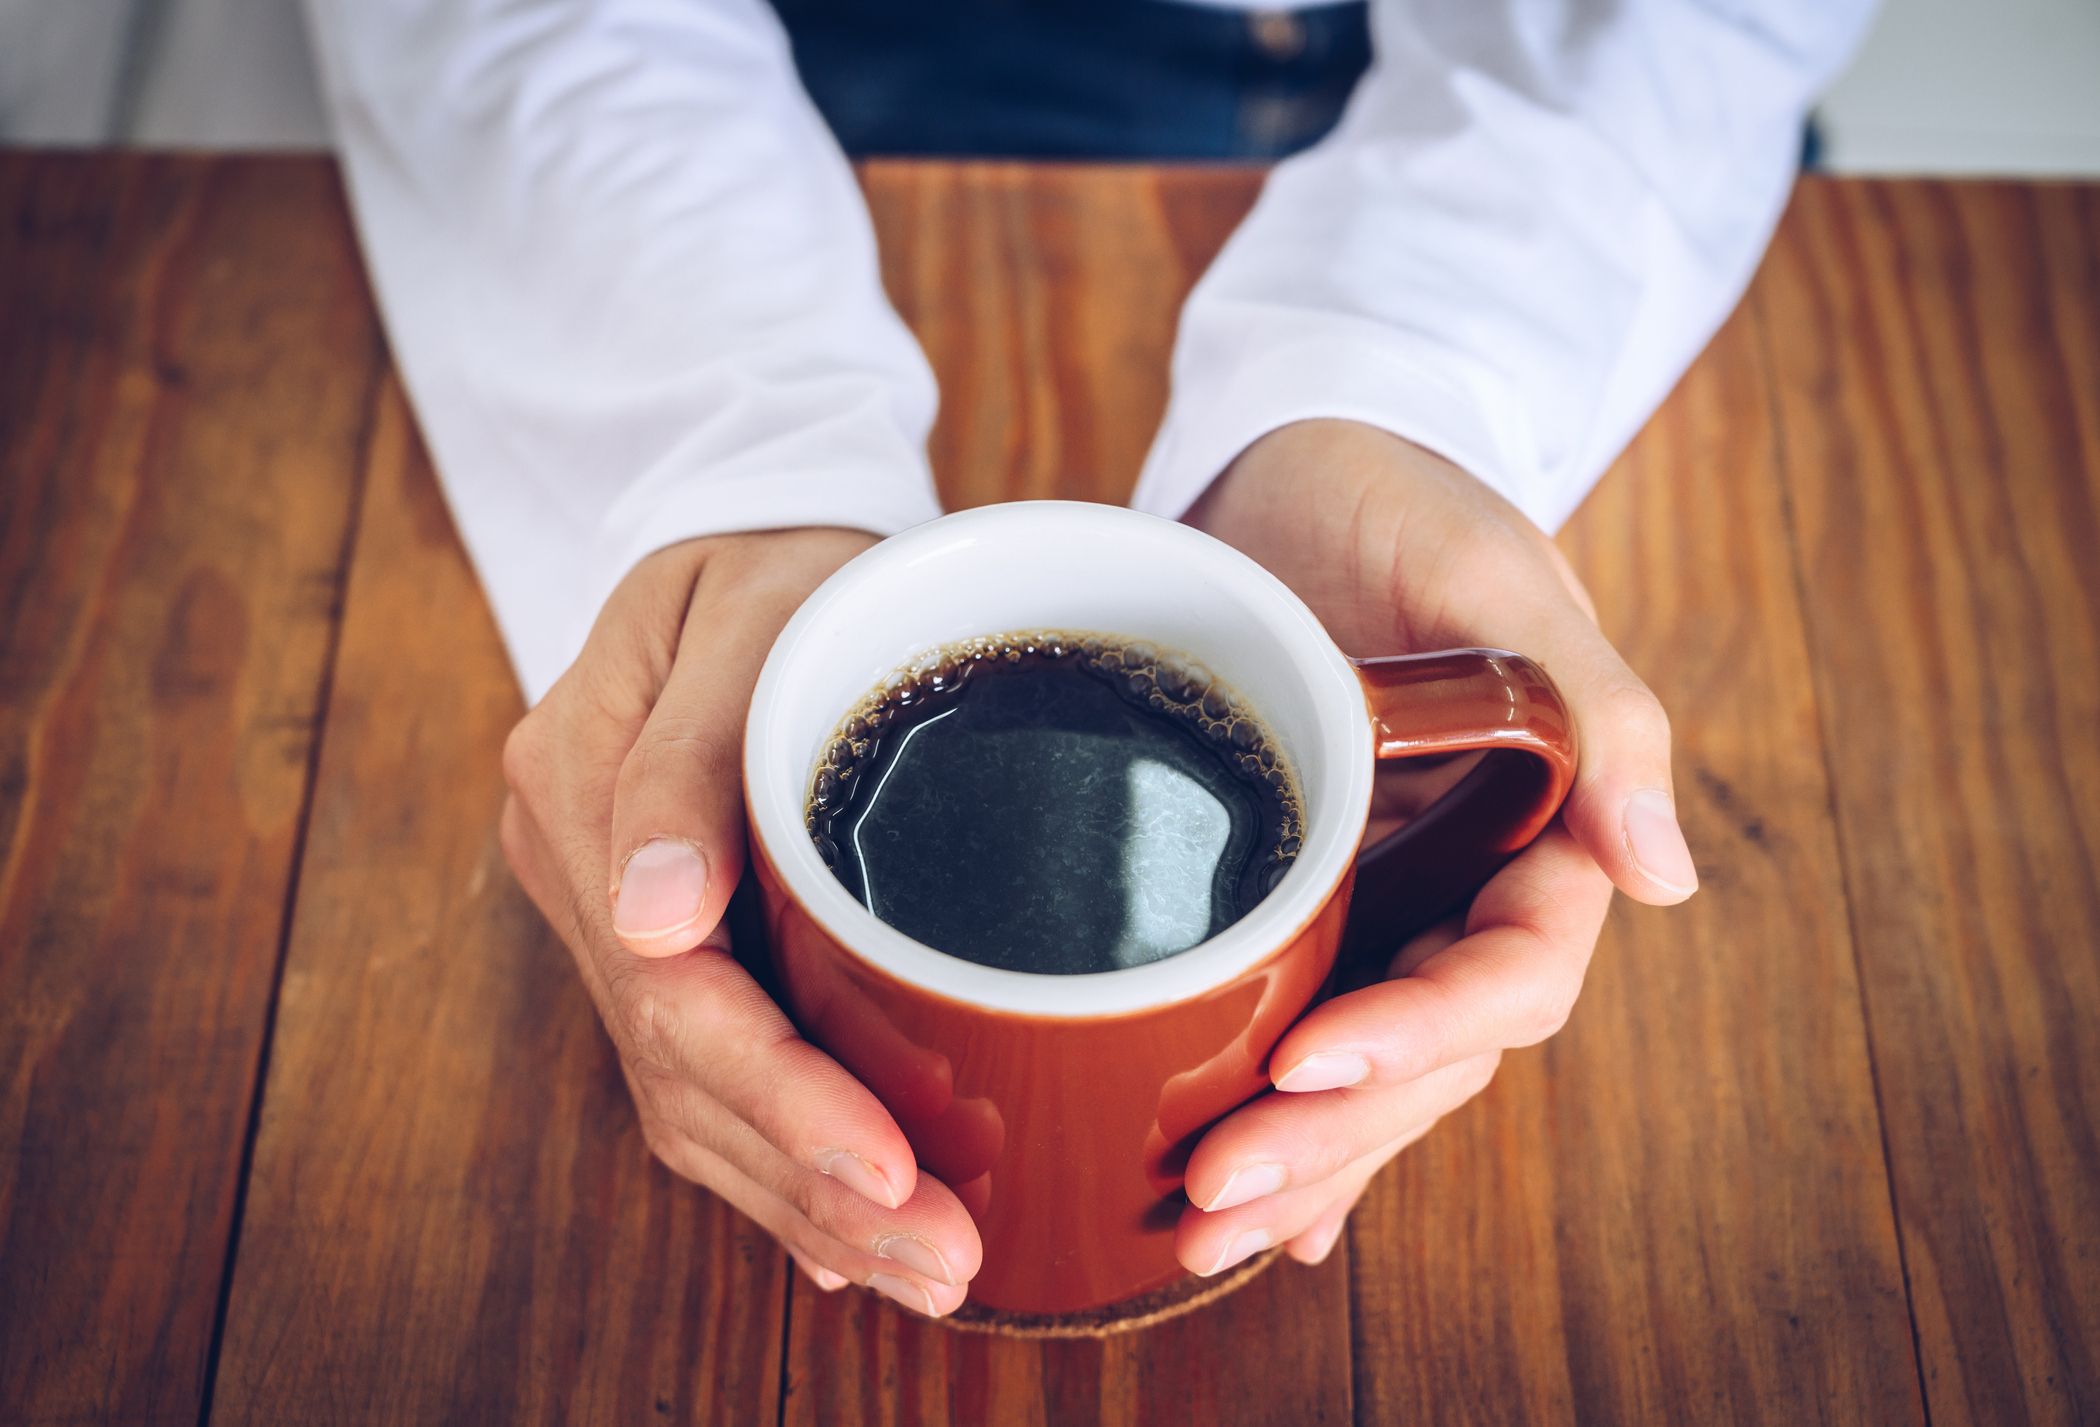 https://hips.hearstapps.com/hmg-prod/images/someone-hands-holding-a-mug-of-black-coffee-before-royalty-free-image-1687962548.jpg